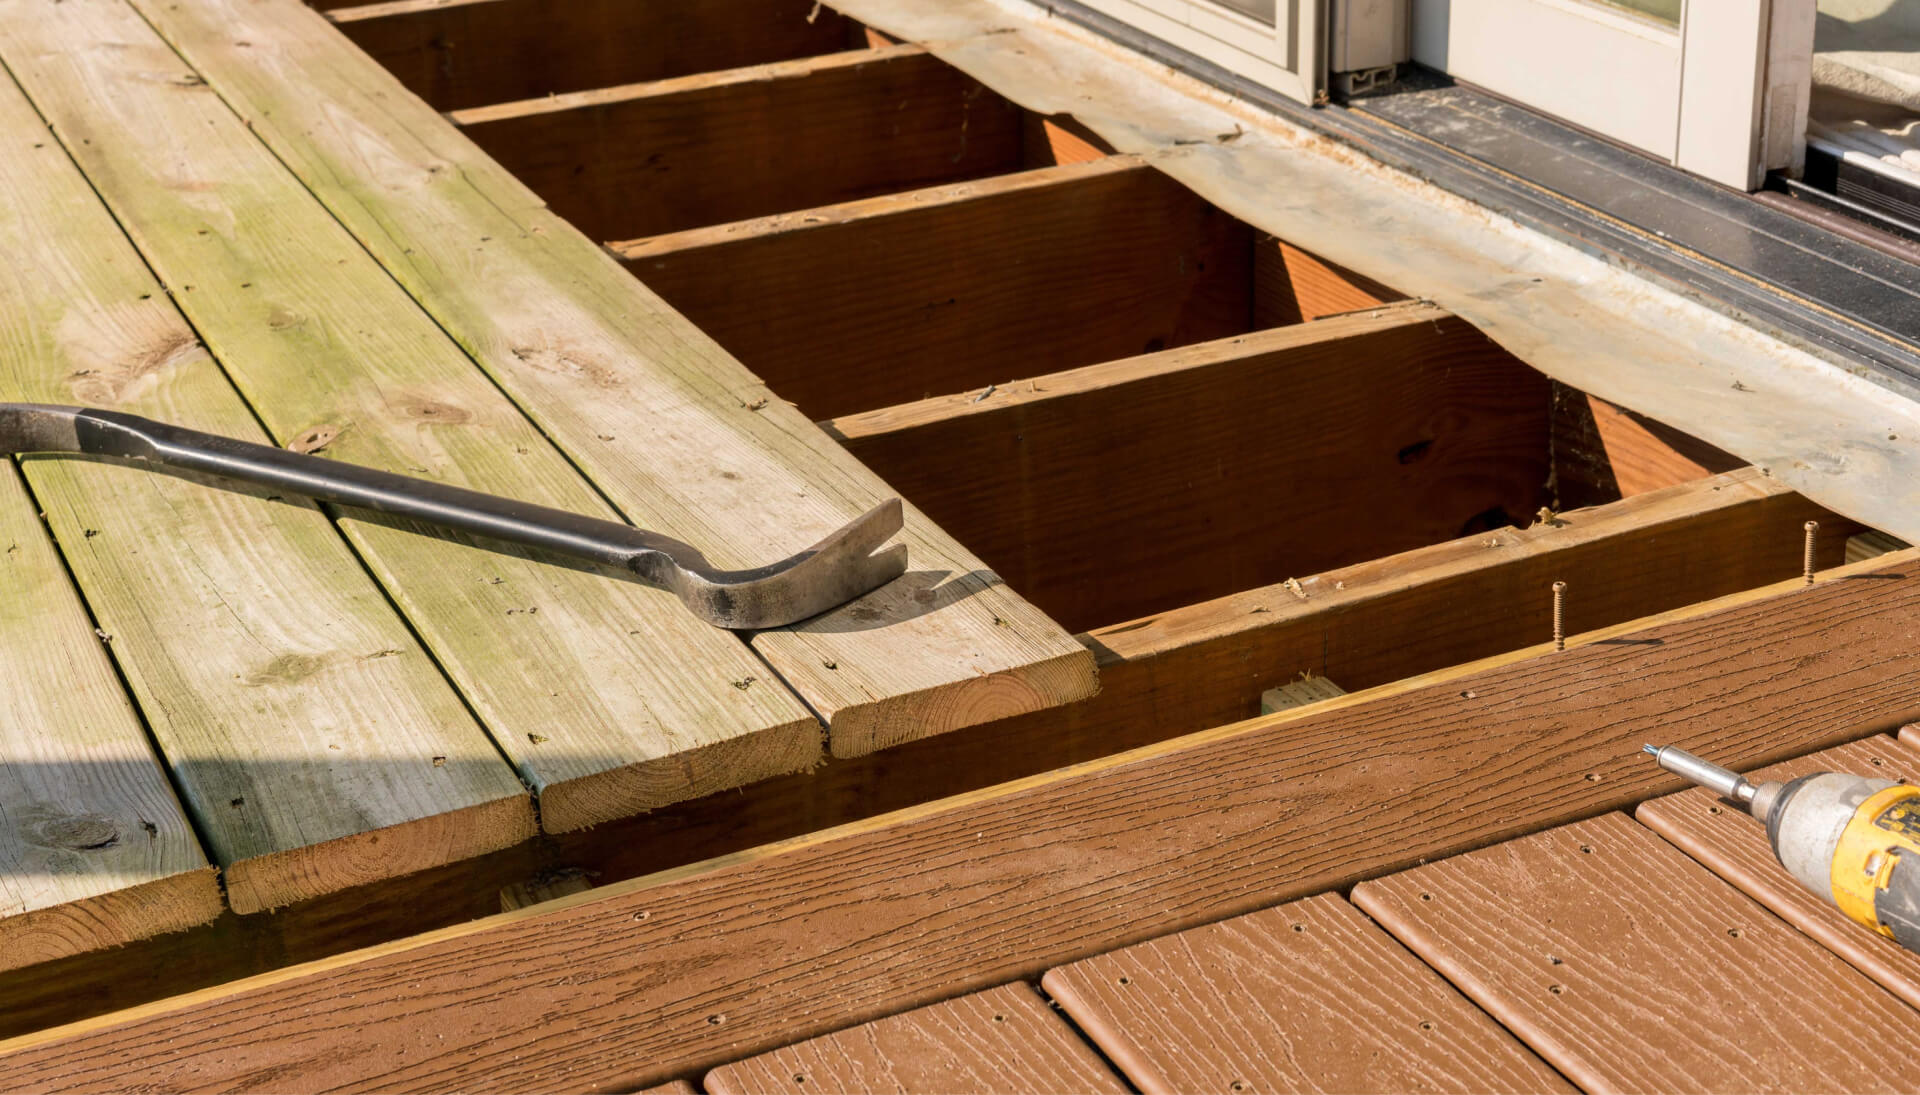 Upgrade your deck with top-rated Deck-Repair in Kalamazoo, MI